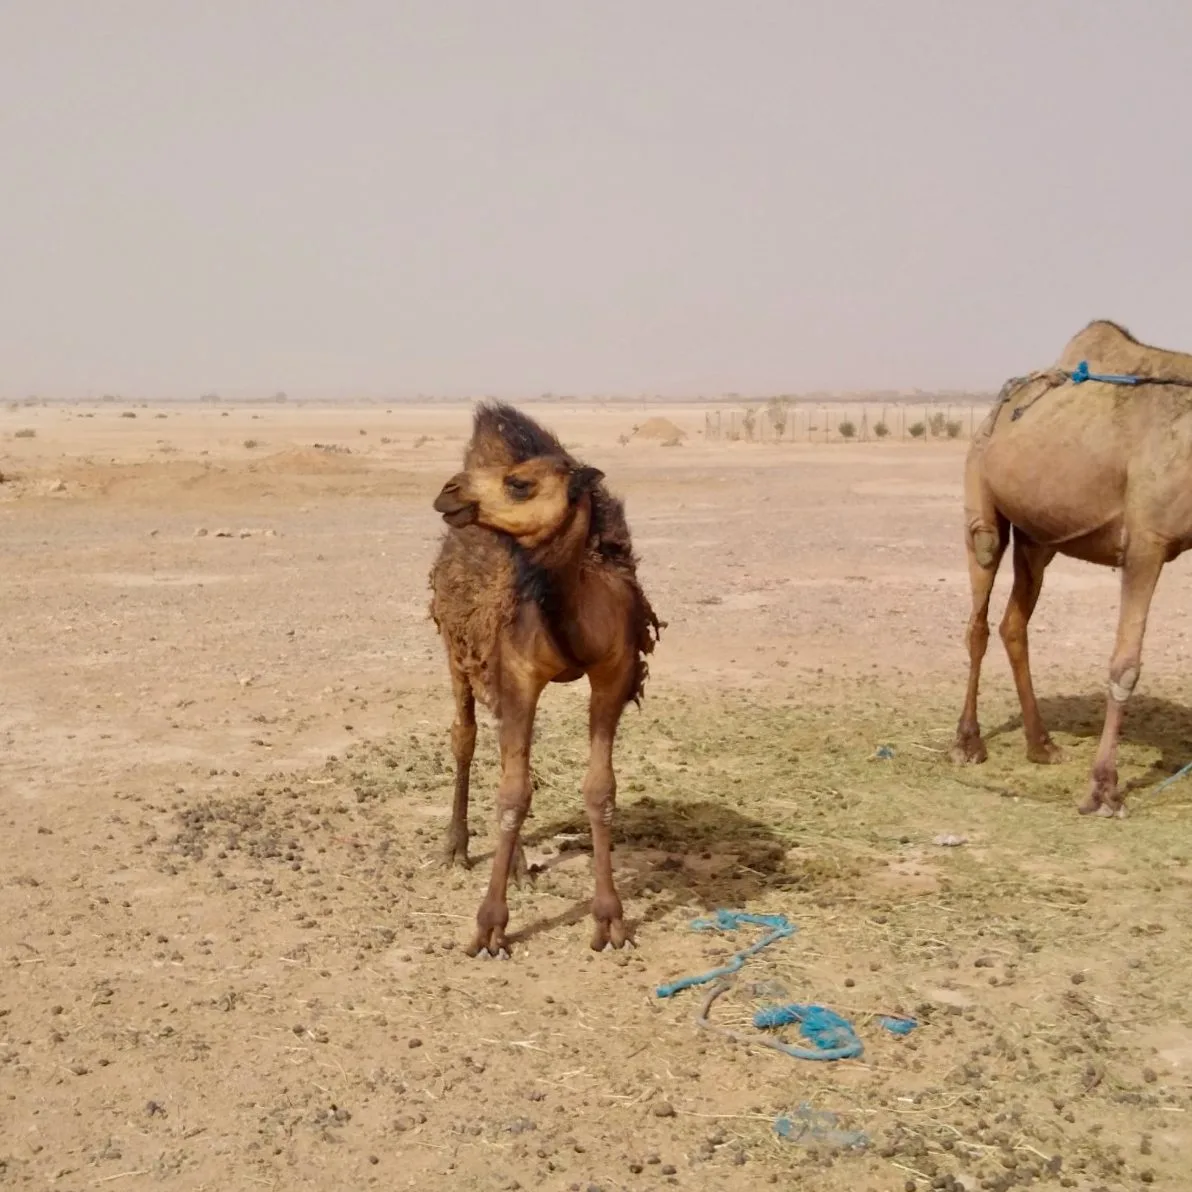 A baby camel in Morocco.